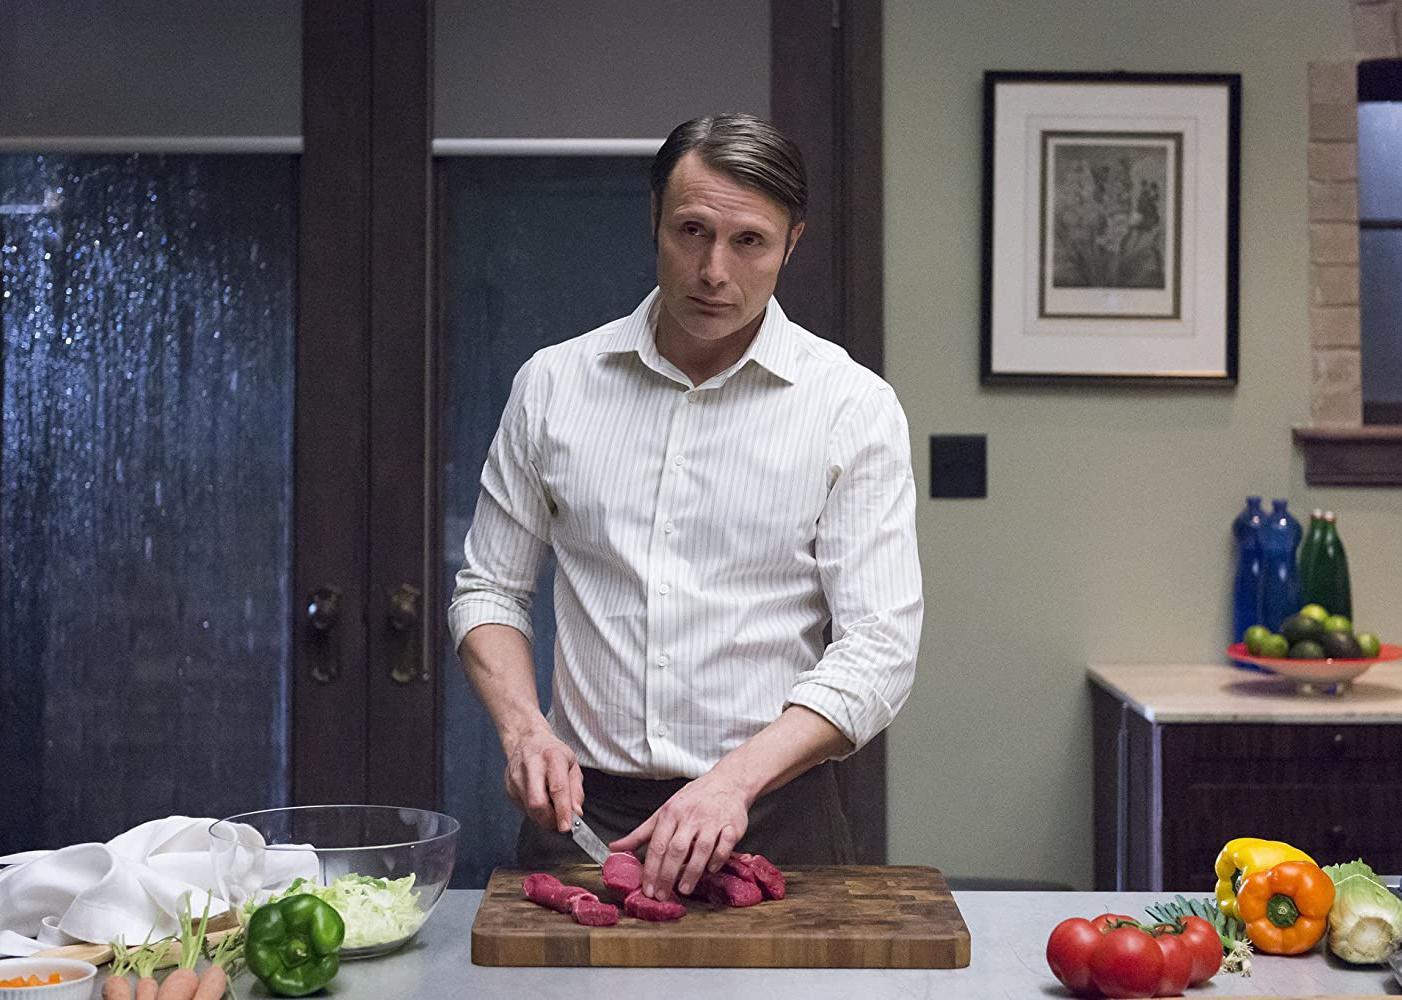 Mads Mikkelsen chops raw meat on a kitchen island covered in vegetables.